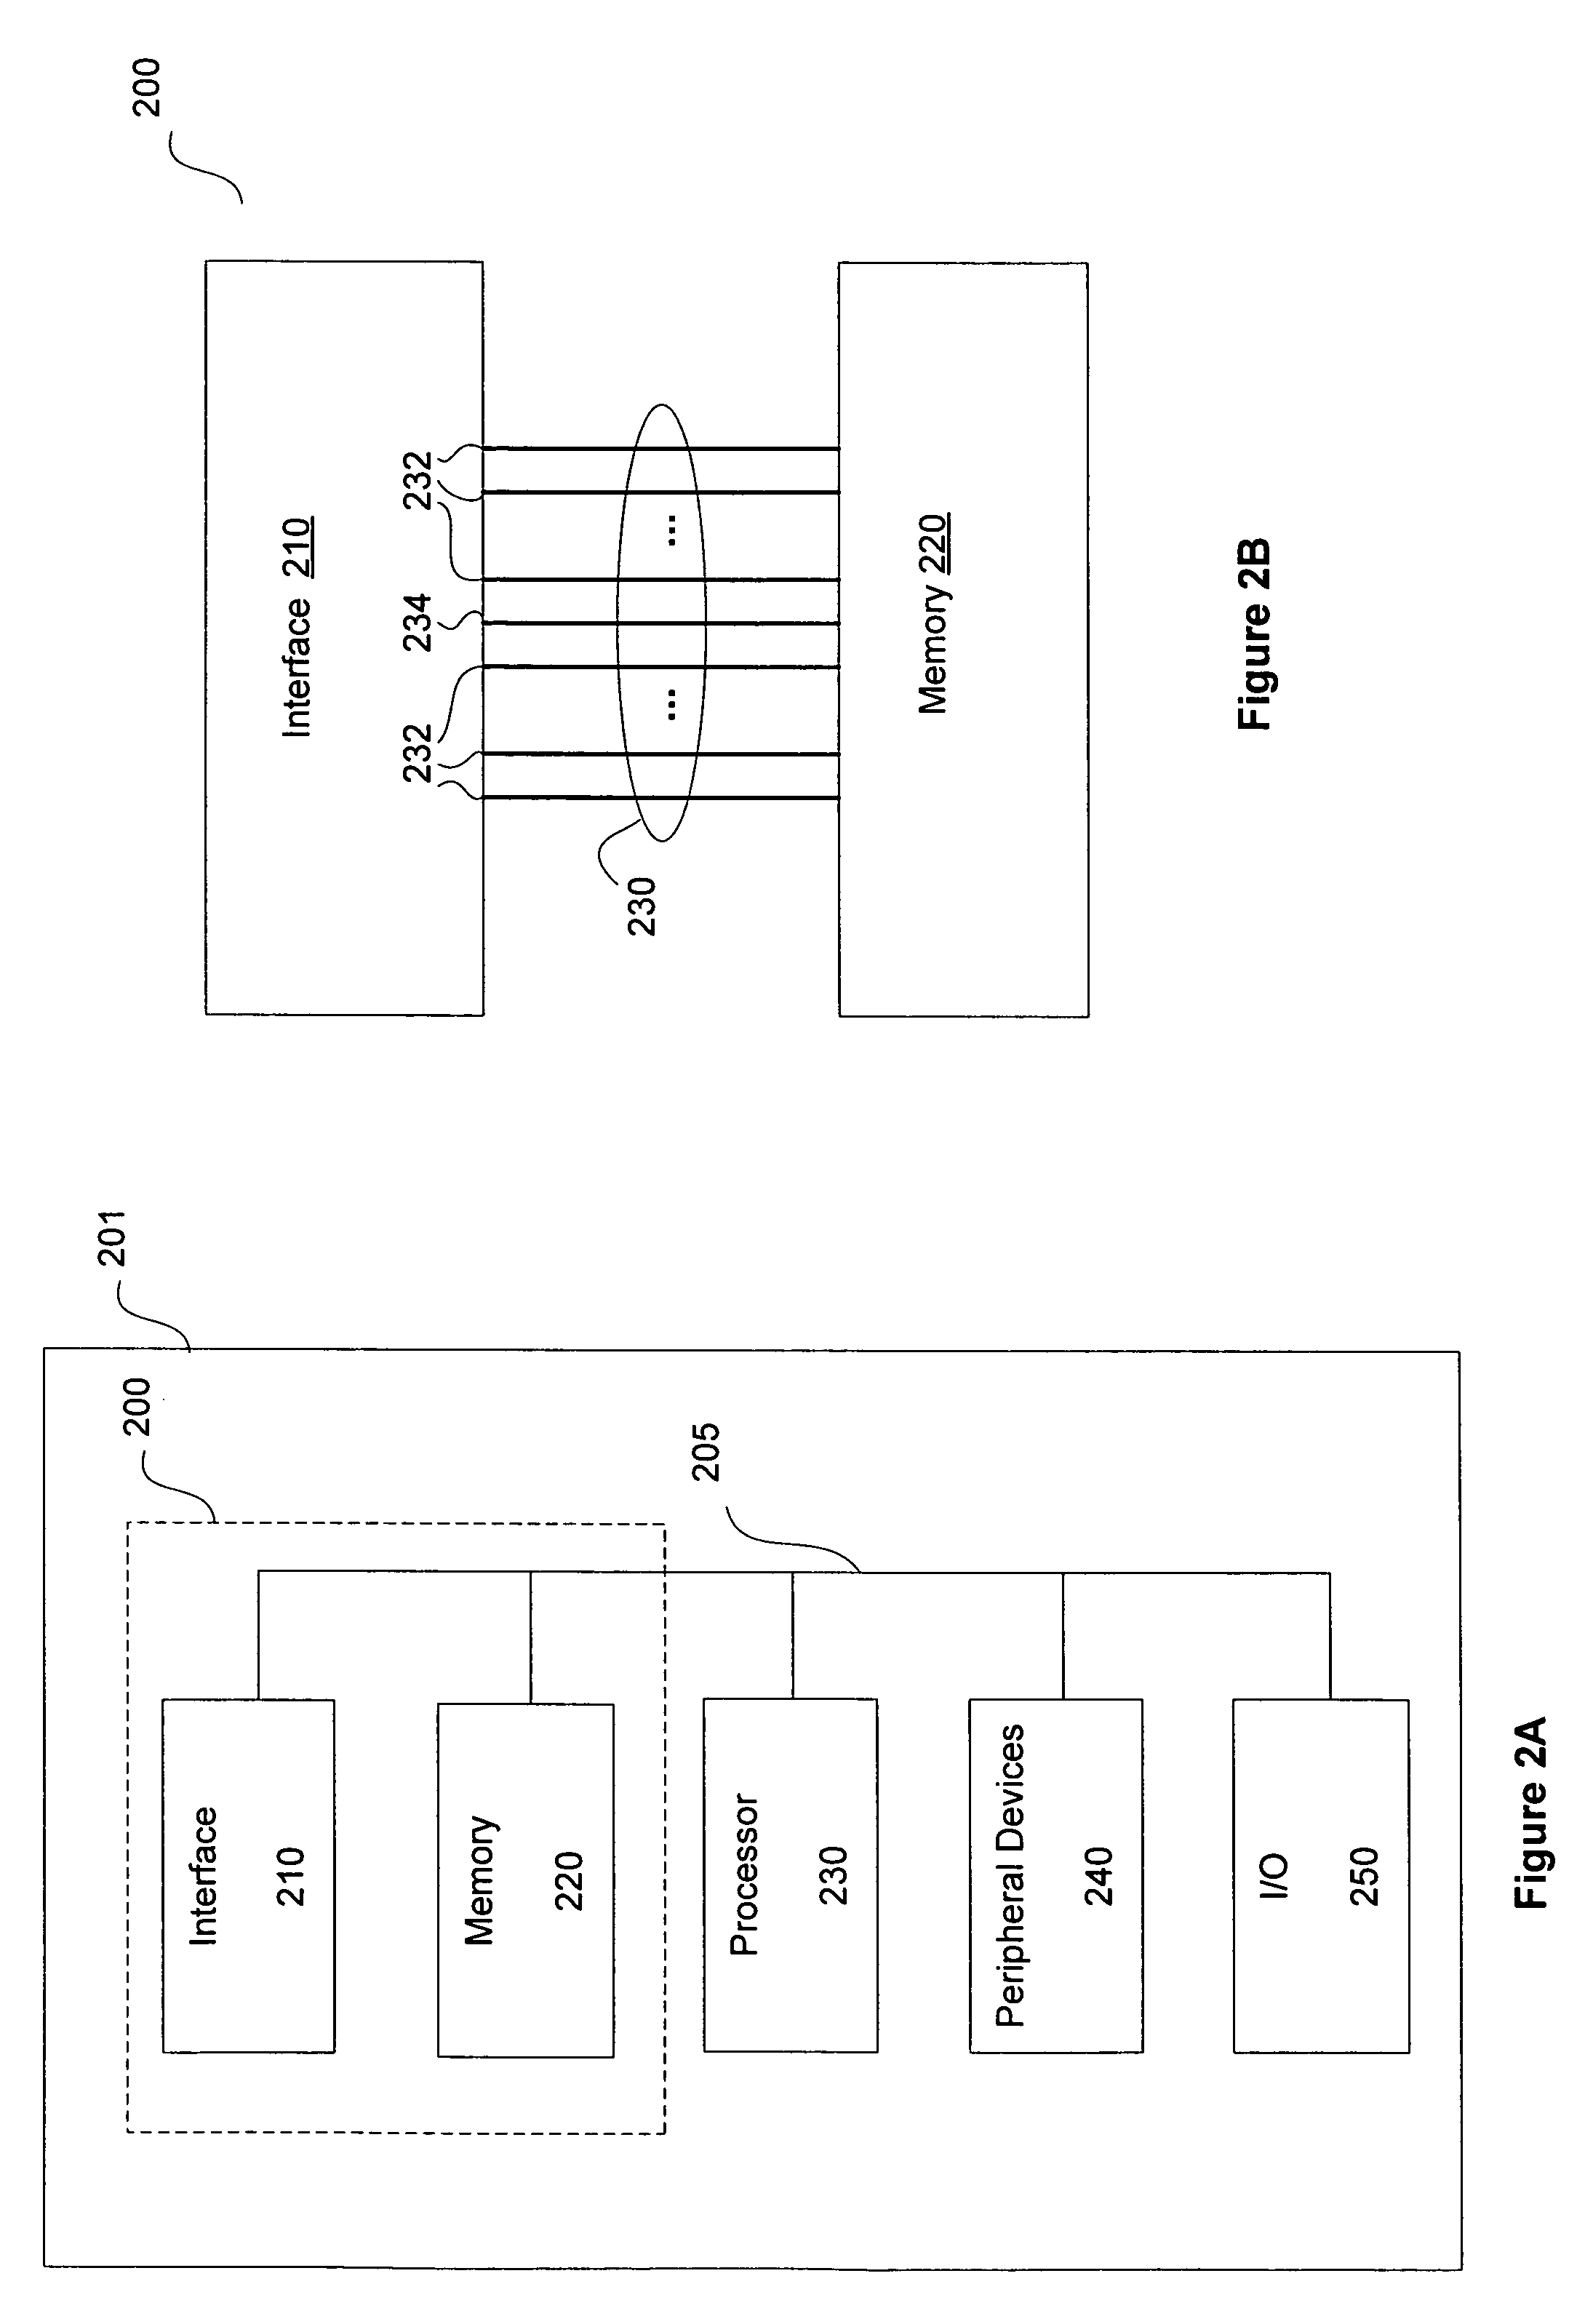 Memory interface phase-shift circuitry to support multiple frequency ranges